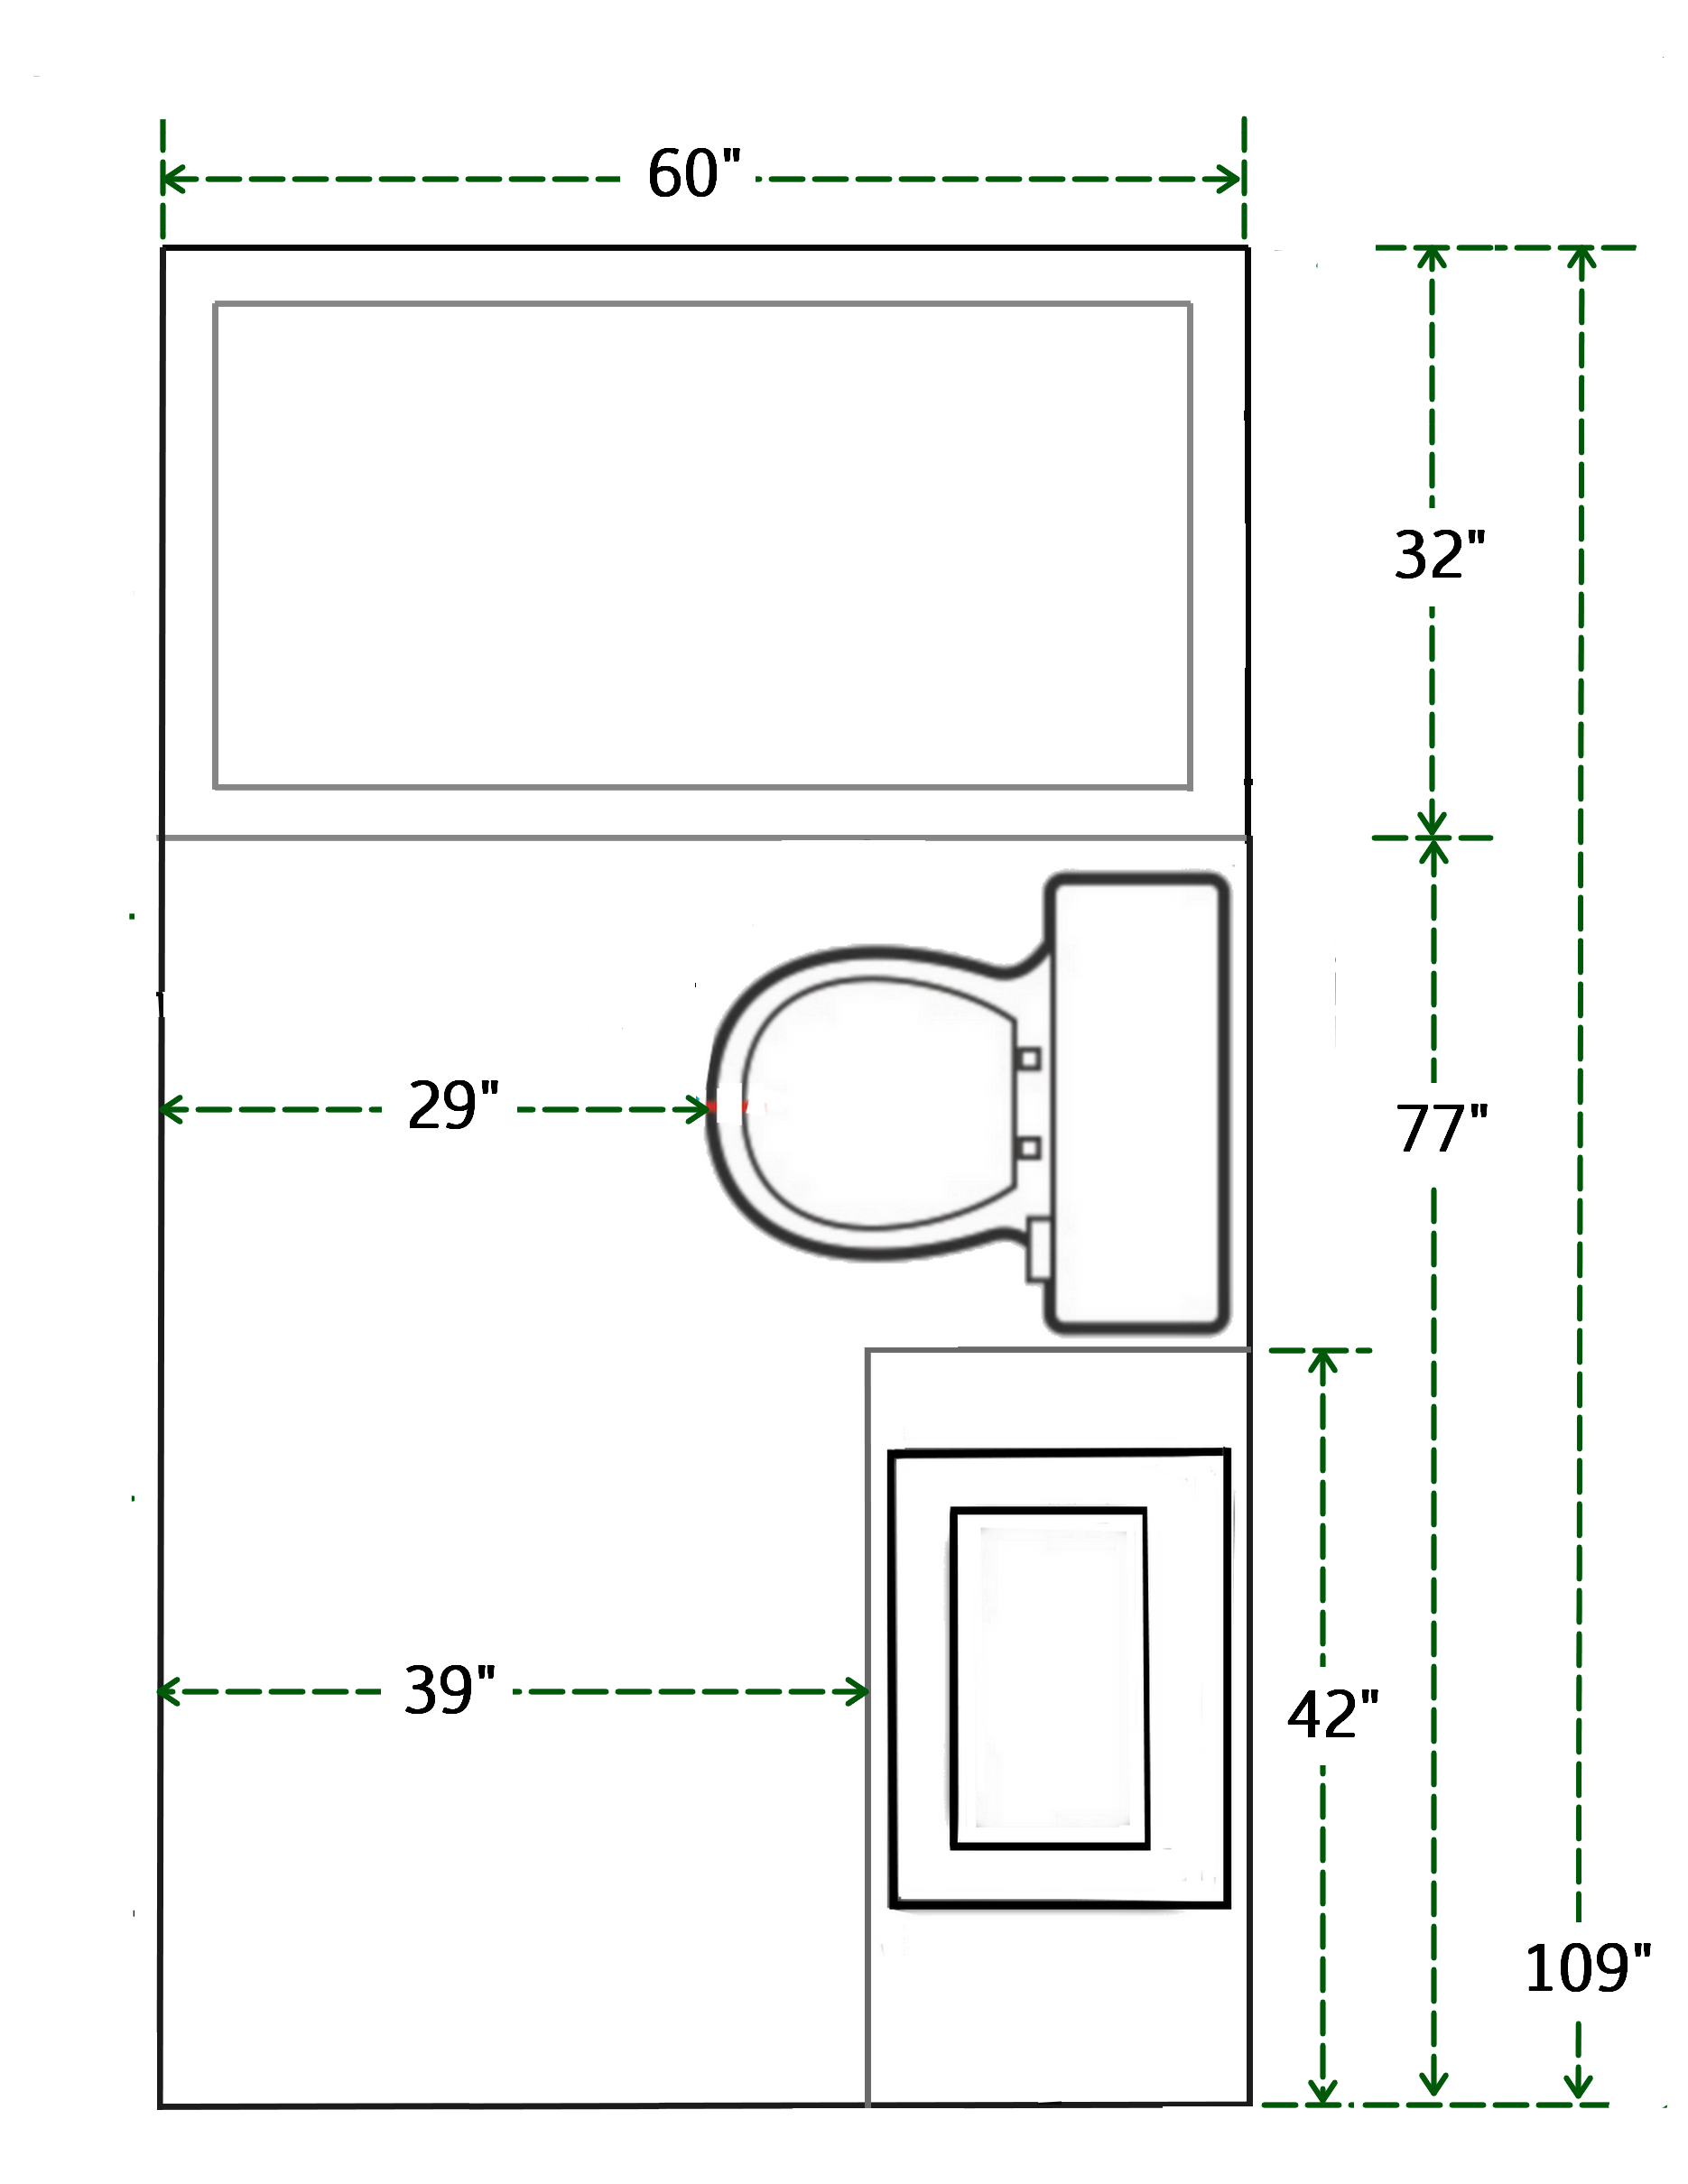 Floor plan and measurements of small bathroom Small